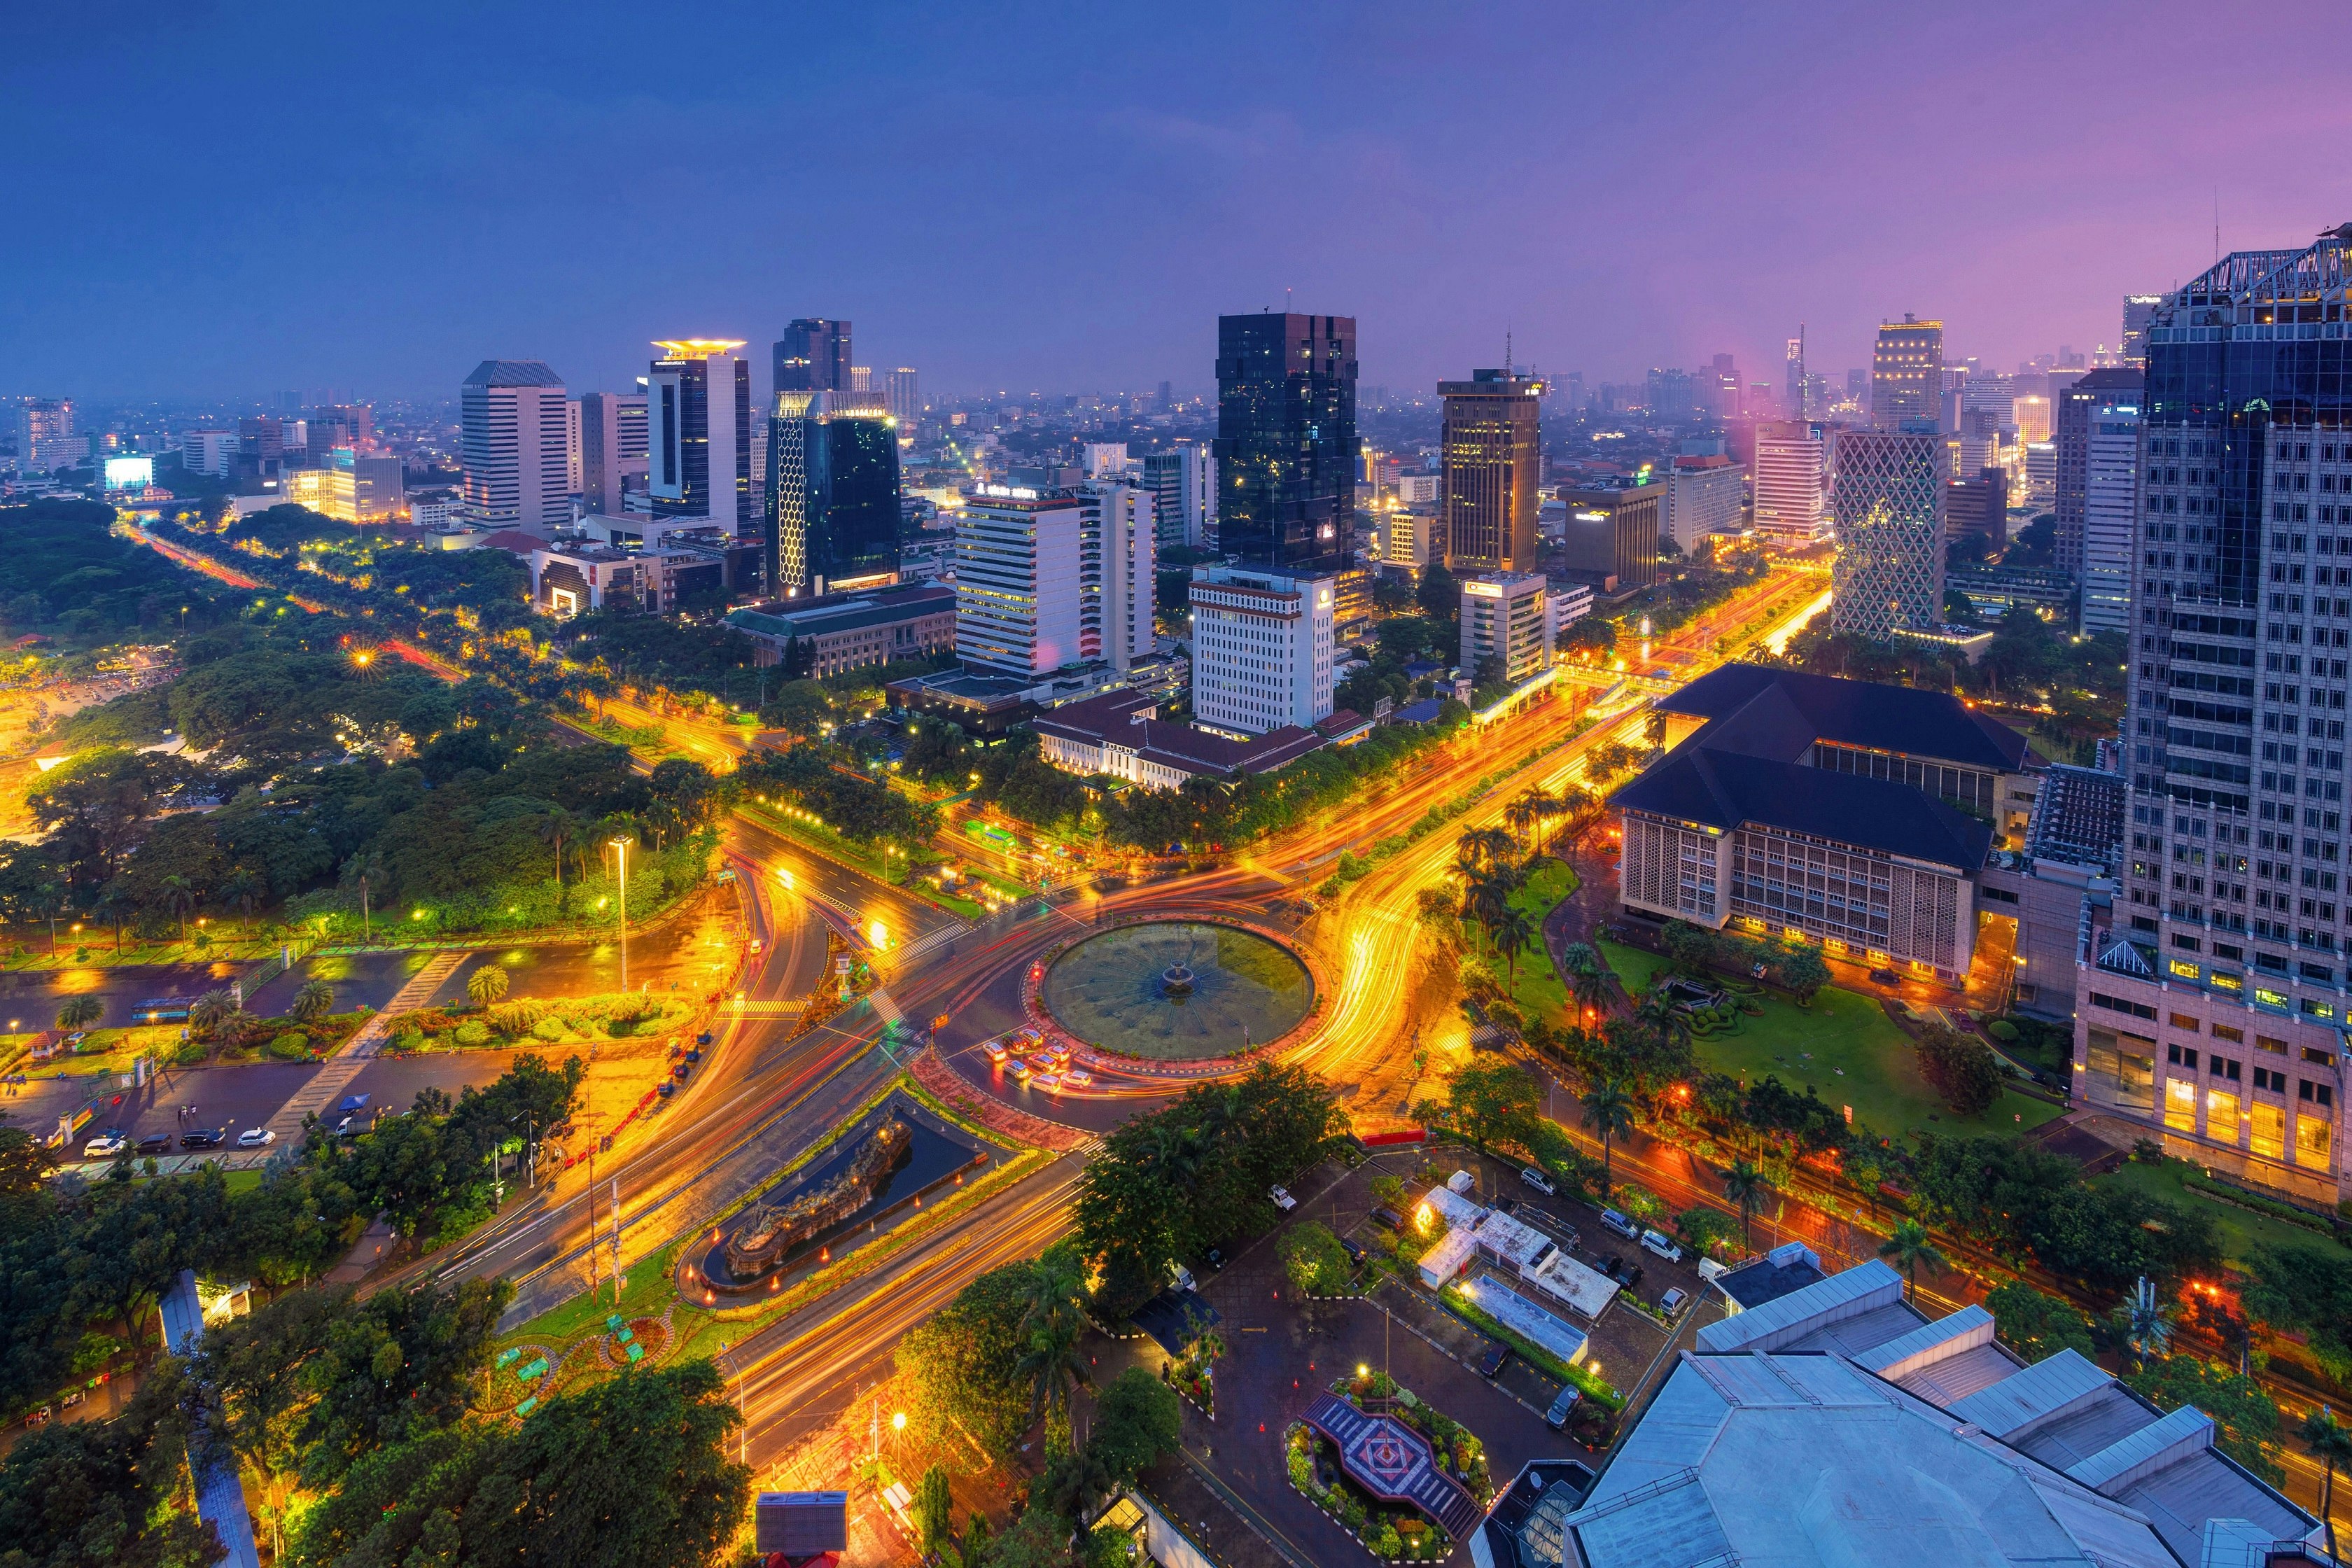 An aerial view of the city of Jakarta taken at night. The windows of skyscrapers are illuminated in the darkness while light trails show the movement of traffic around the busy streets.